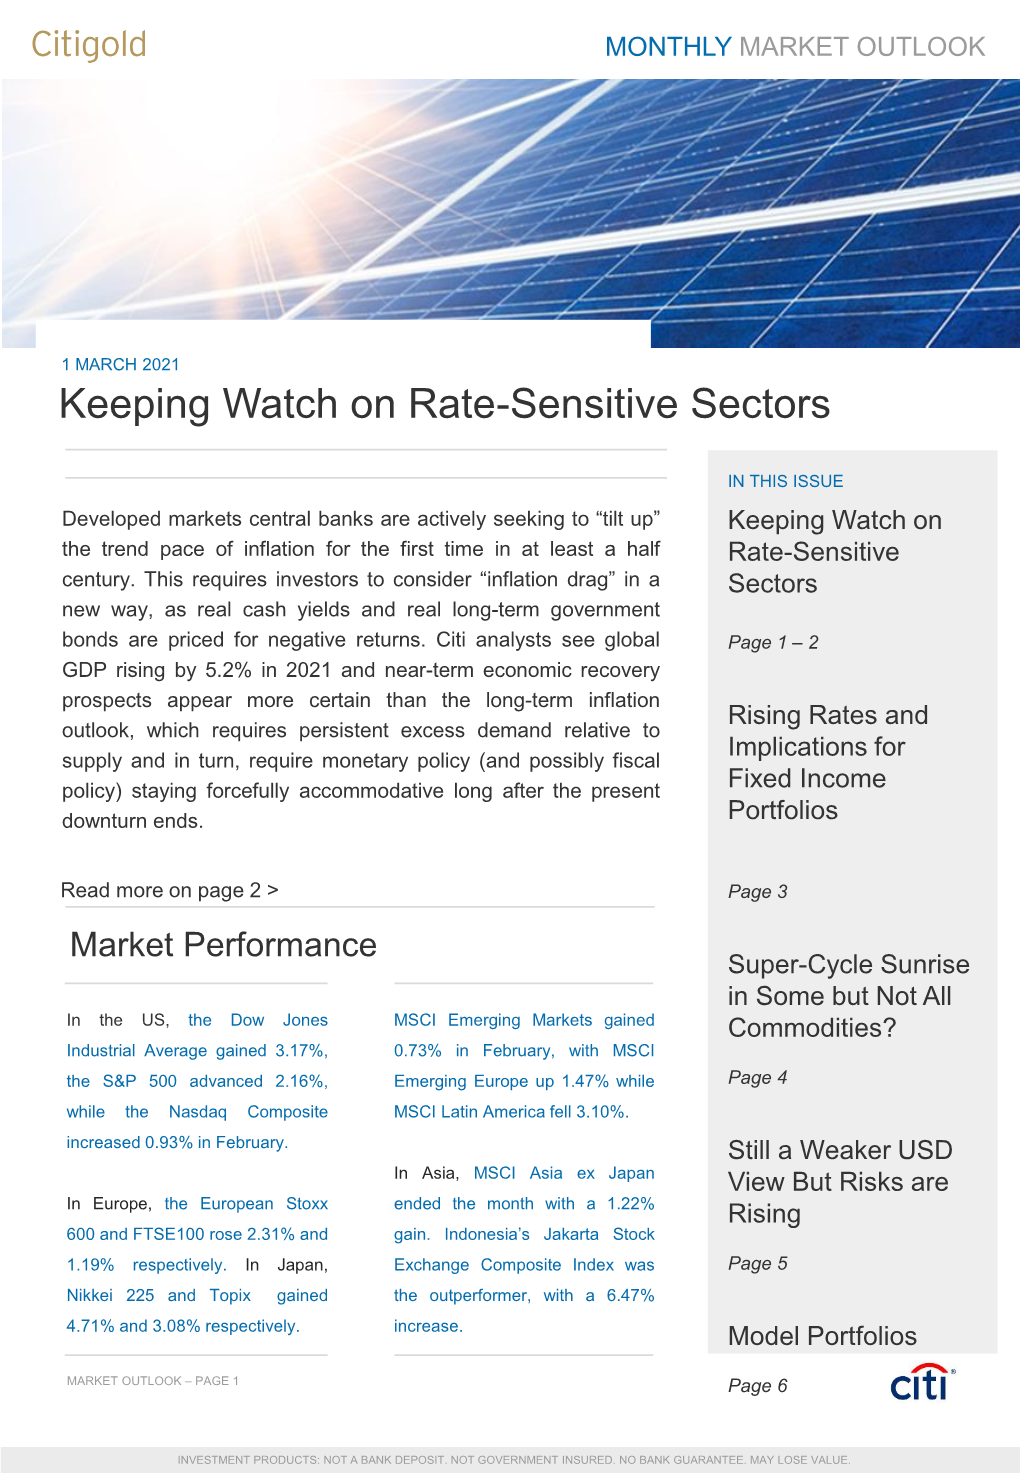 Keeping Watch on Rate-Sensitive Sectors